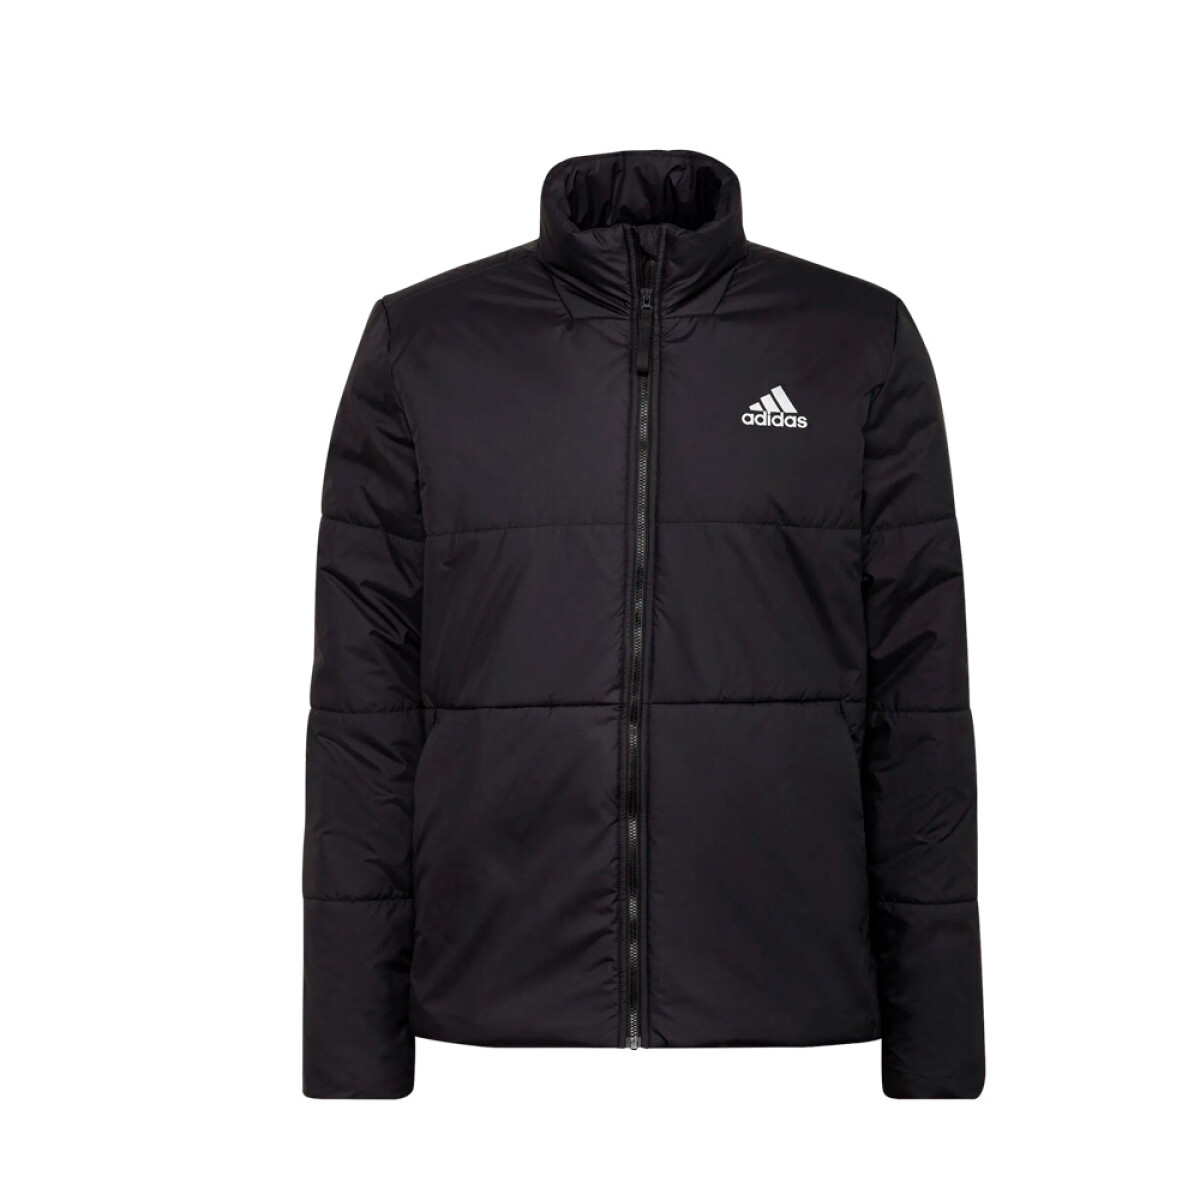 CAMPERA adidas BSC INSULATED - BLACK 